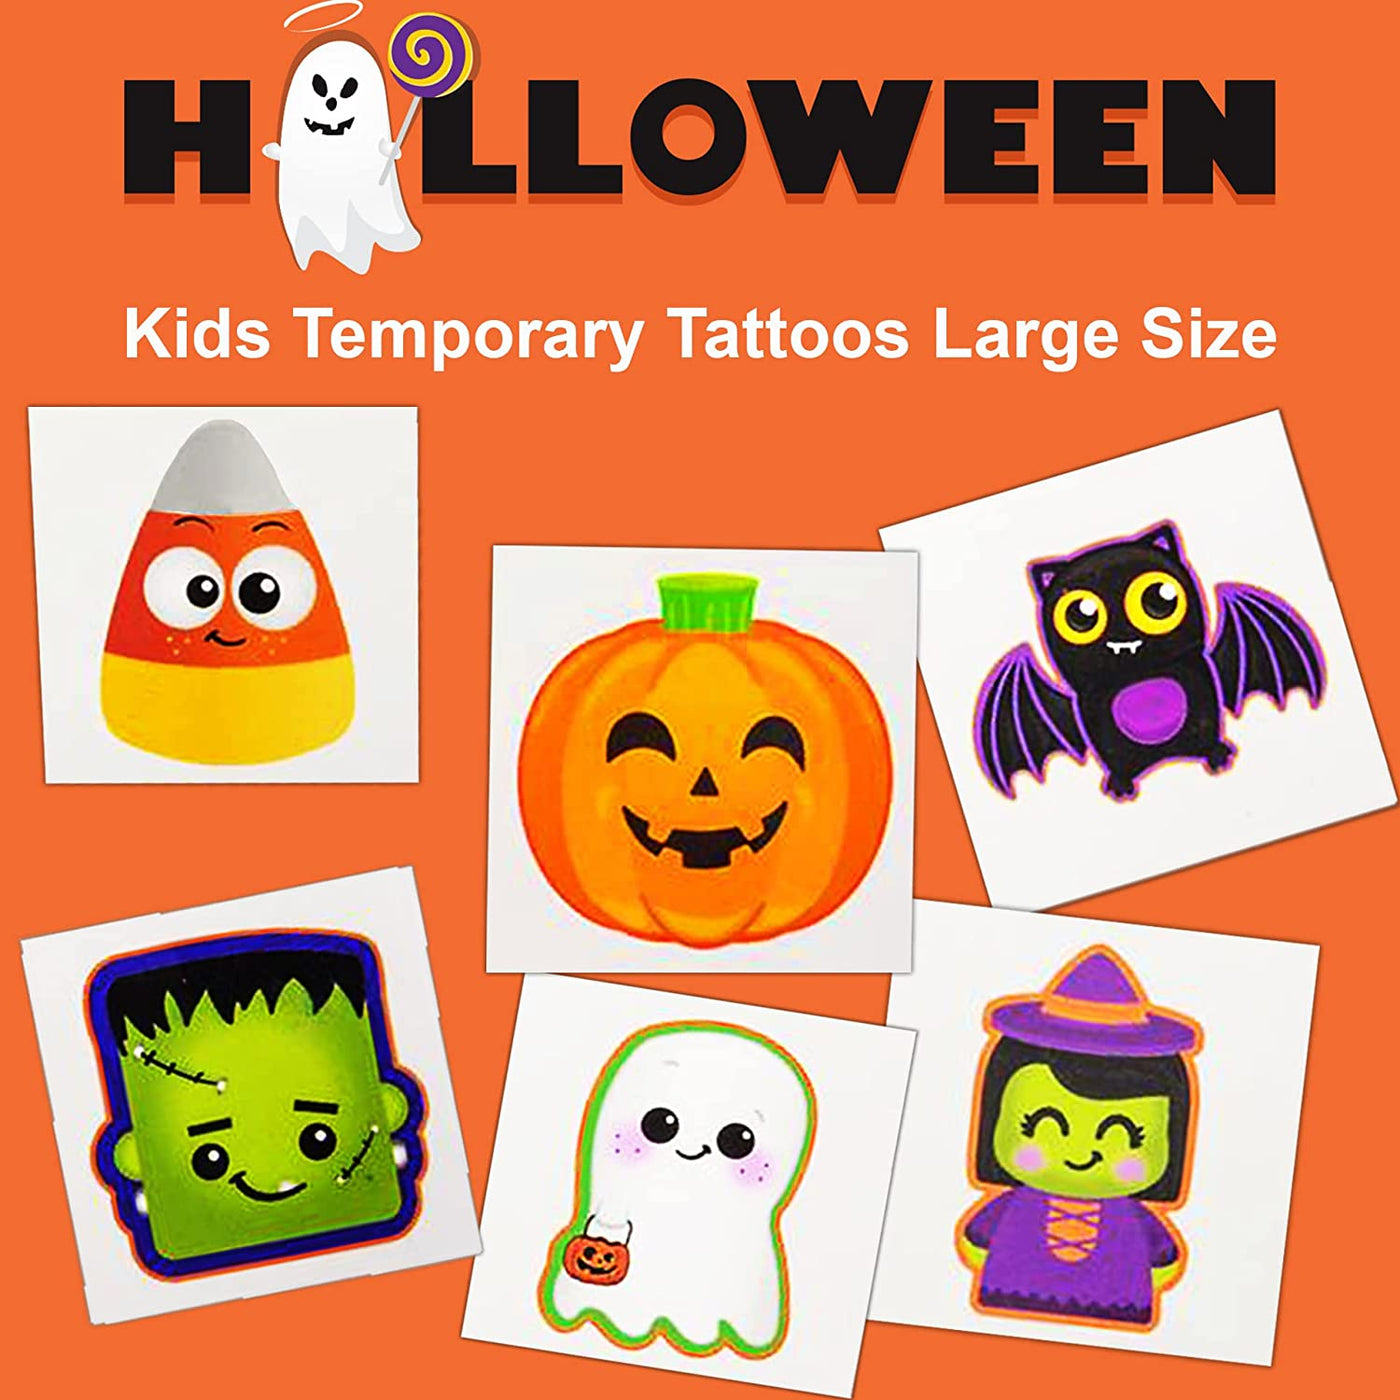 144 Pcs Halloween Tattoos for Kids Temporary Bulk Pack Halloween Themed Tattos Stickers for Face Body Non-Toxic 2" for Halloween Goodie Bag Fillers Classroom Prizes Party Favors by 4E's Novelty